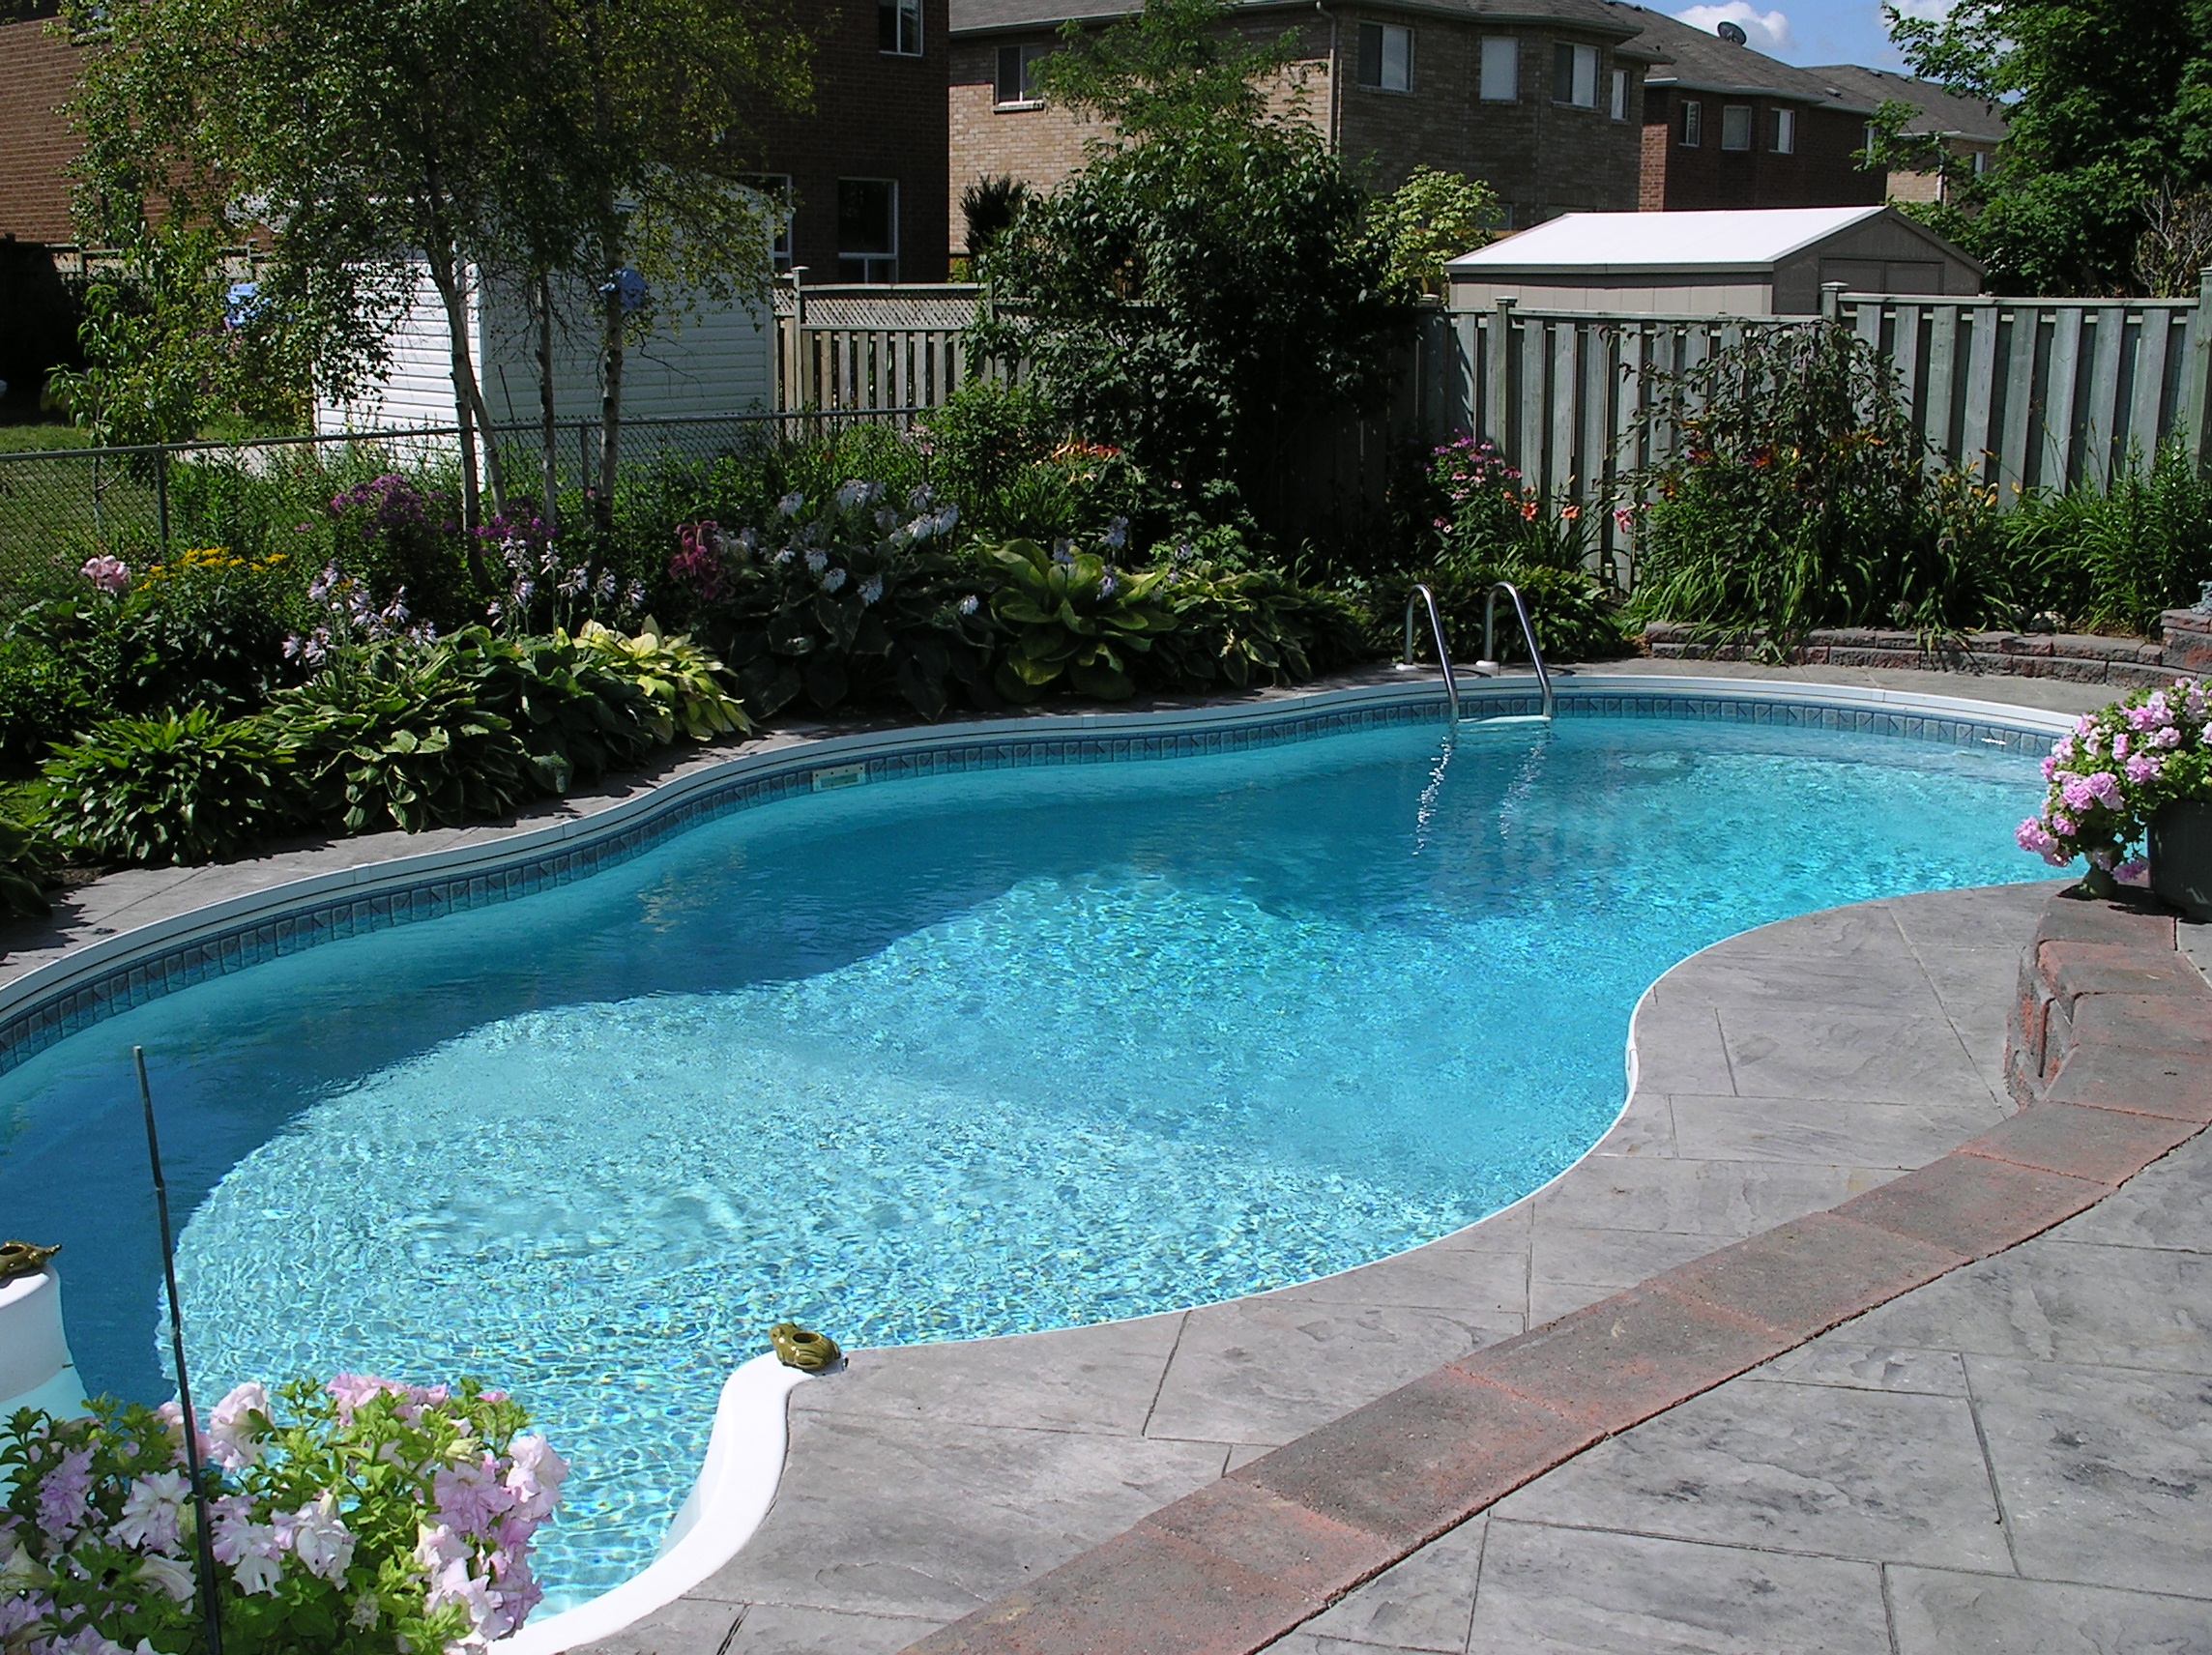 The Benefits of Professional Pool Installation Services